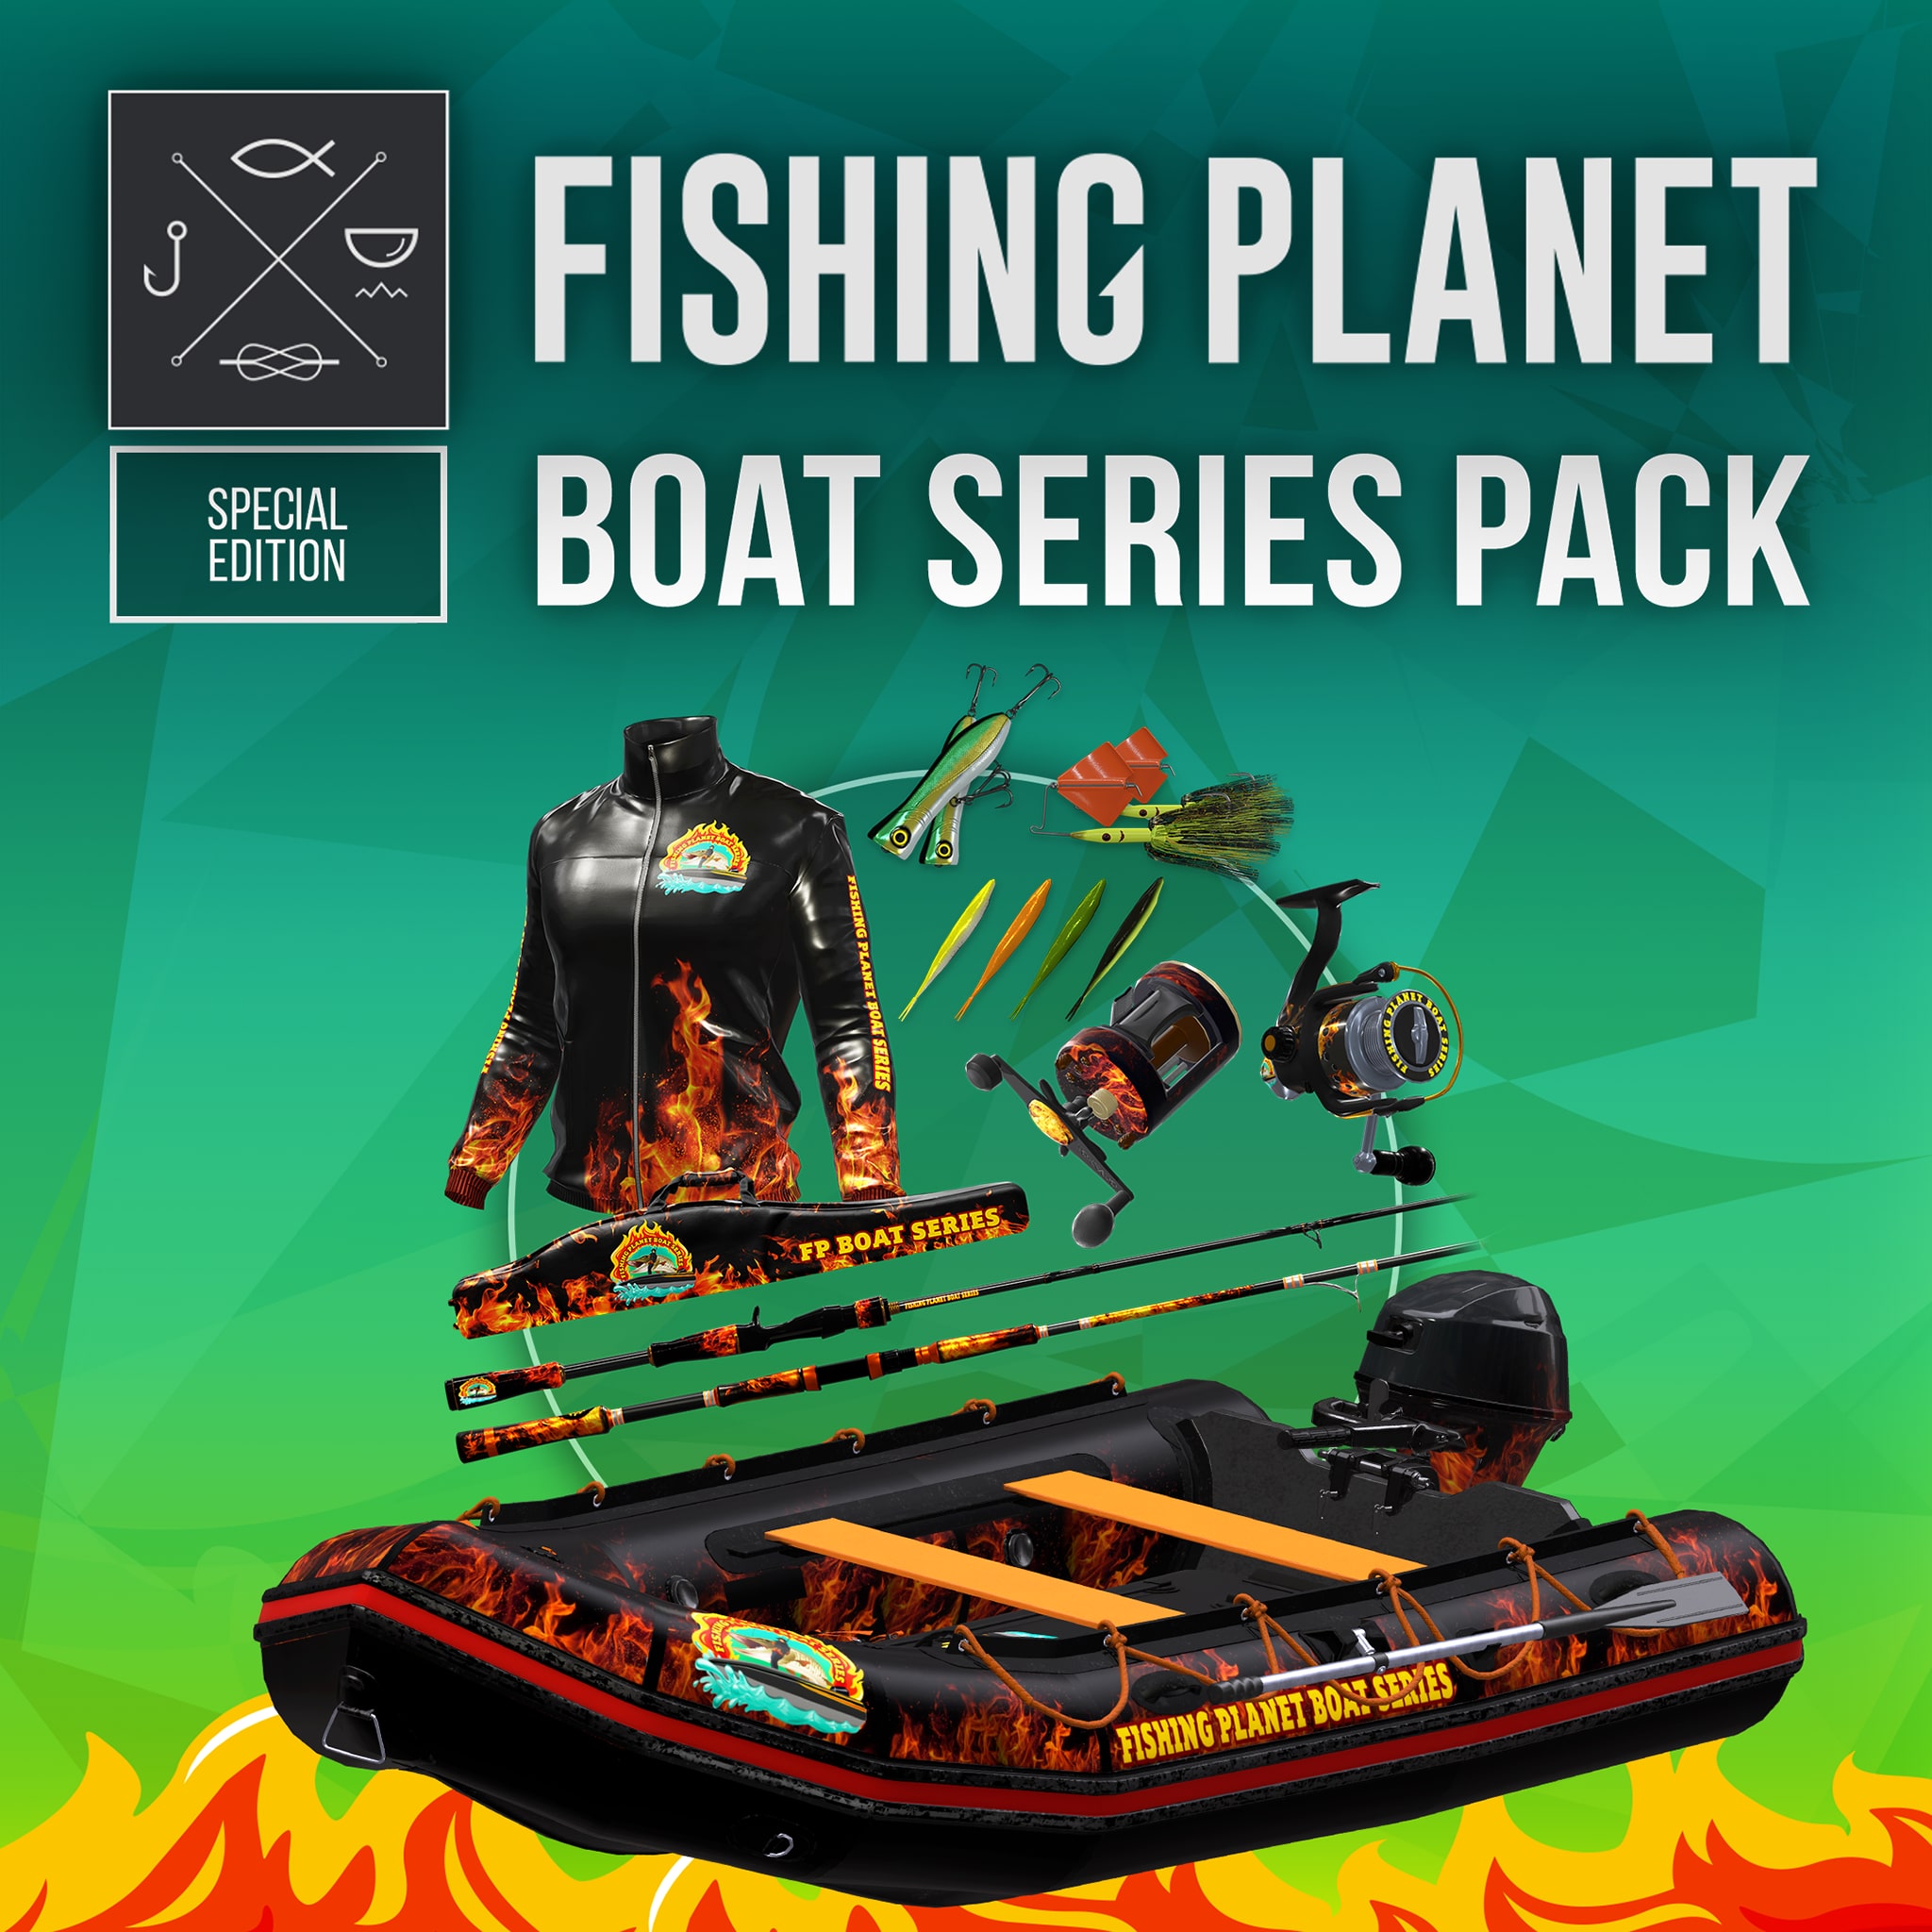 multiperson boats fishing planet